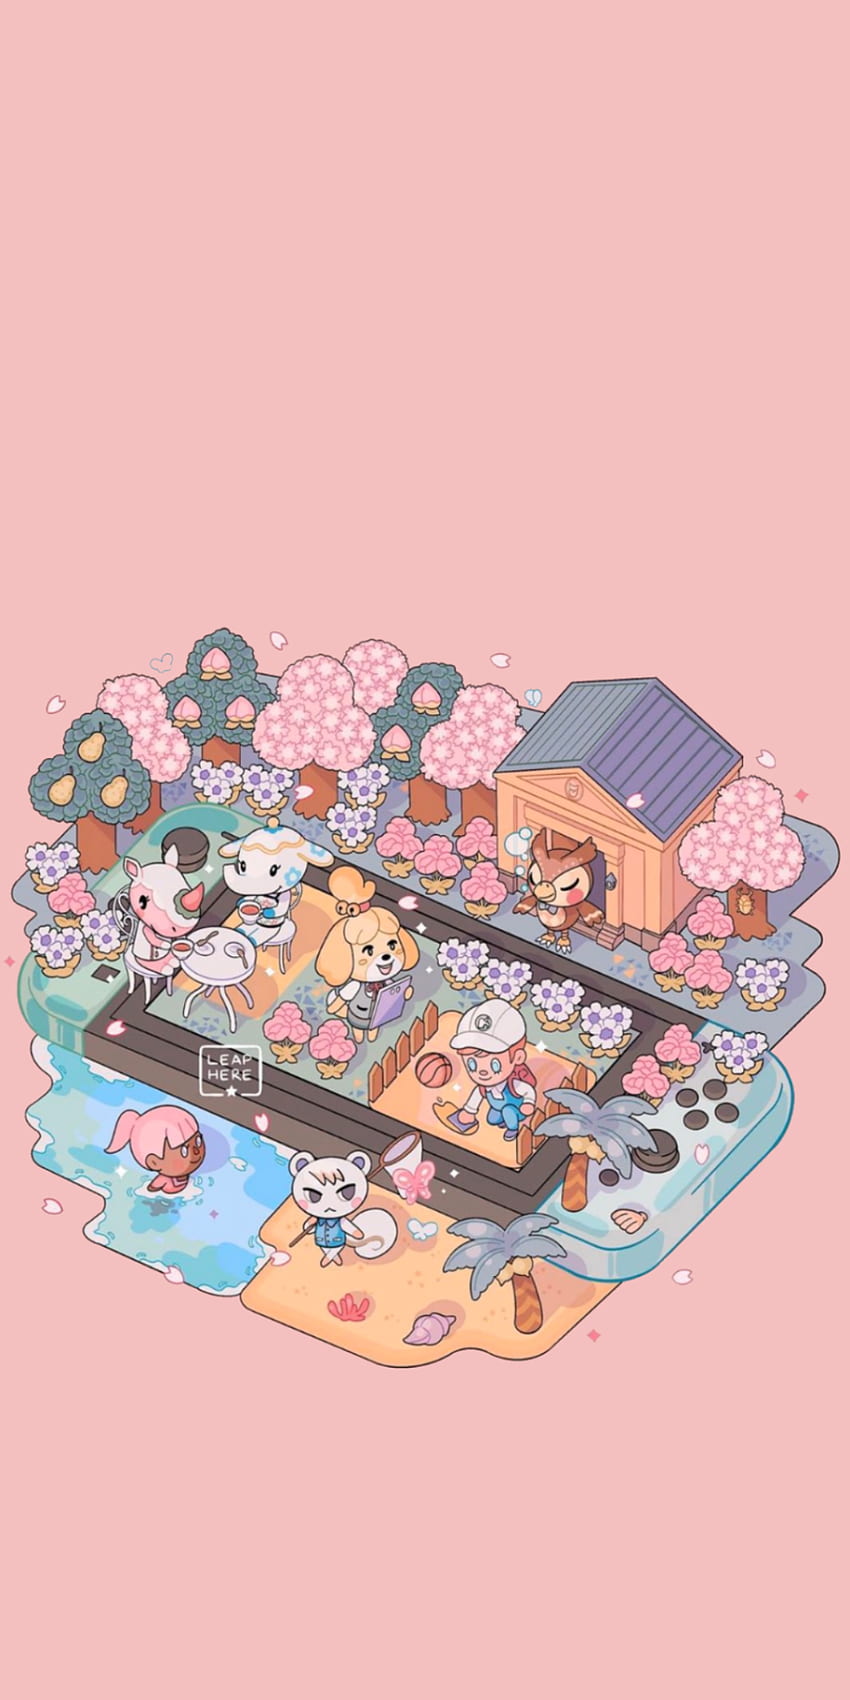 Animal crossing phone wallpaper characters on a pink background - Milk